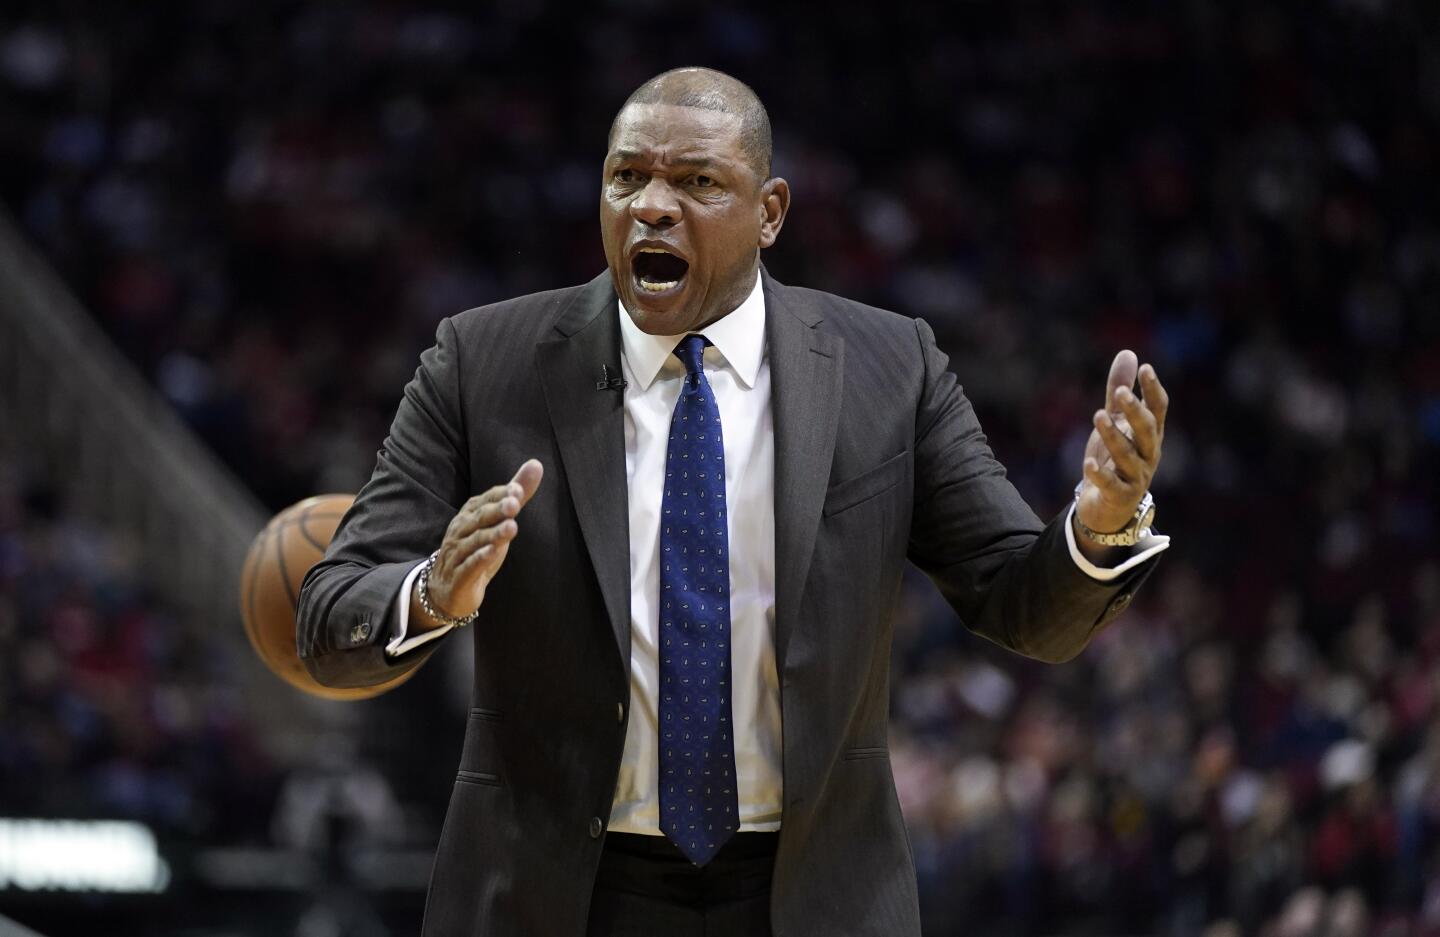 Clippers coach Doc Rivers yells at his players during the first half of a game Nov. 13 against the Rockets.